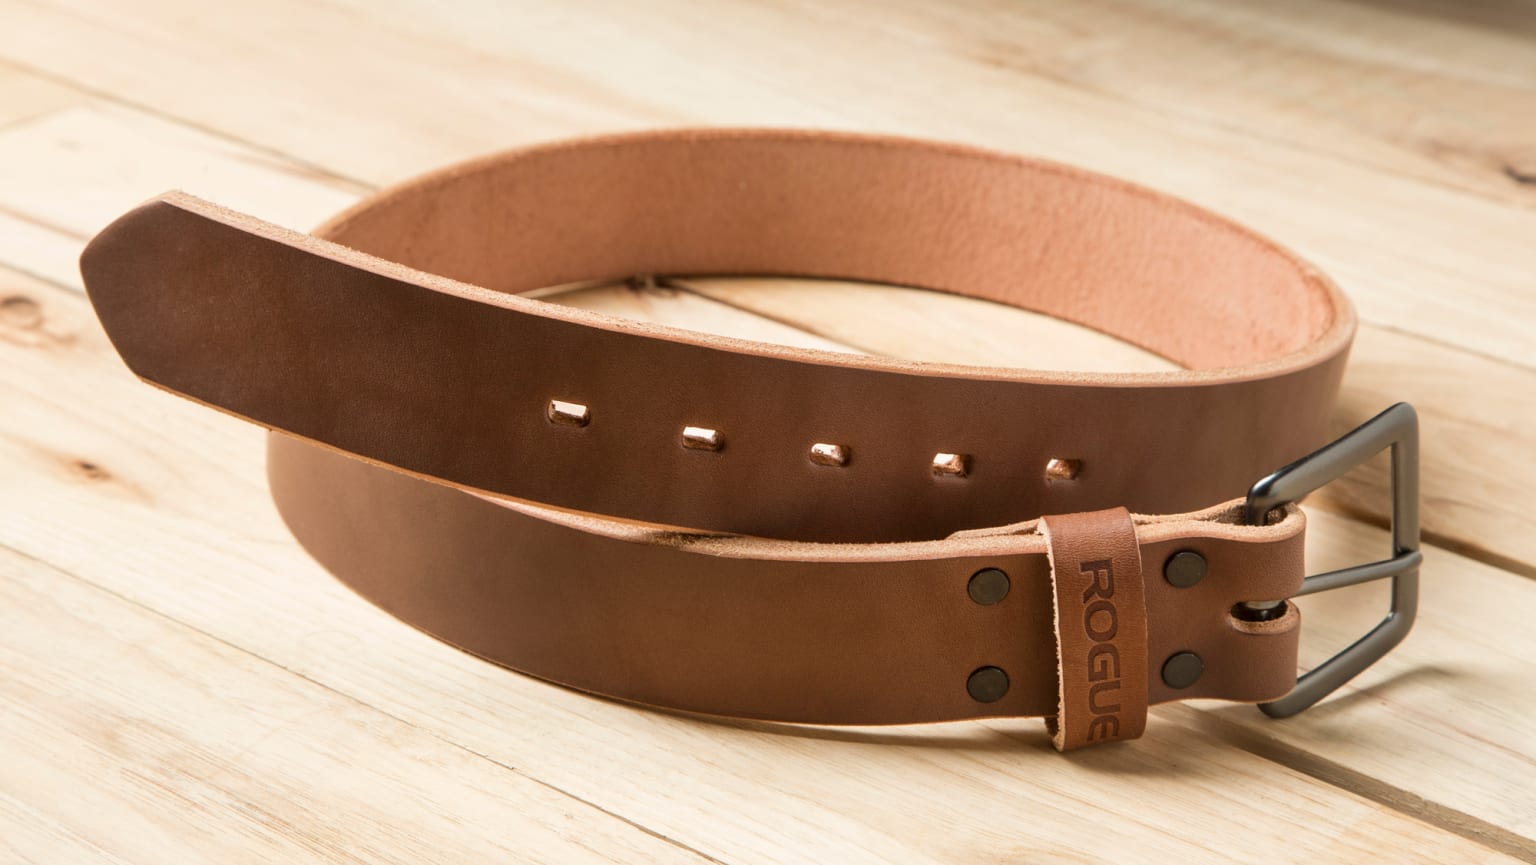 Rogue Leather Belt - Handmade High-Quality Leather Belt, Made in the USA |  Rogue USA